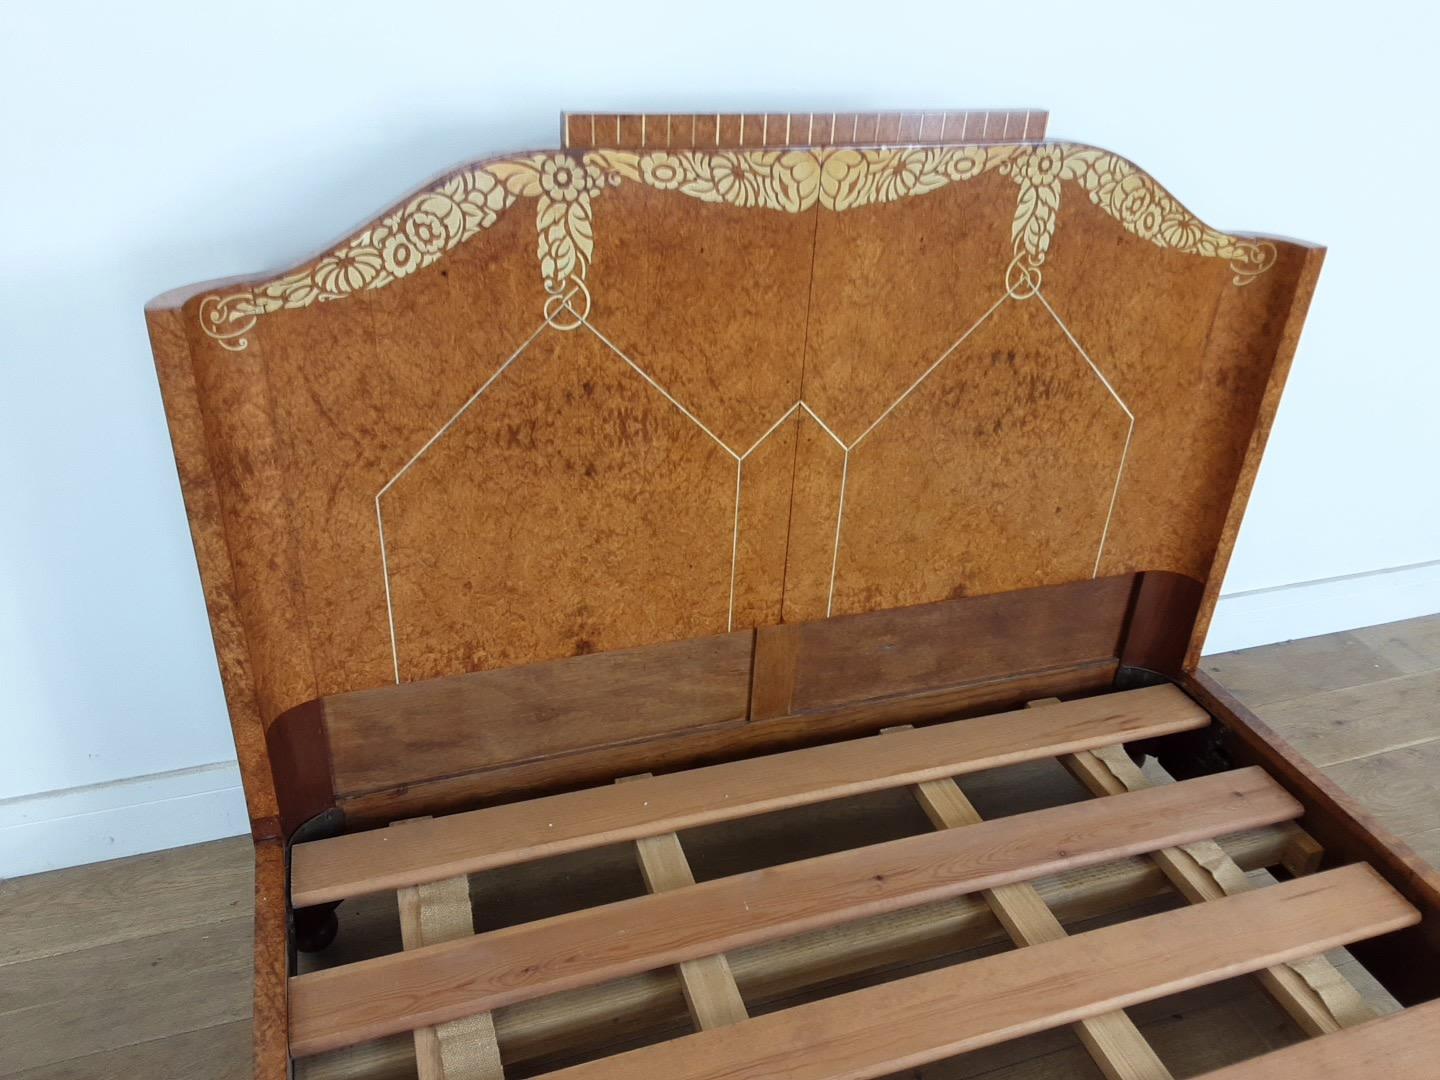 20th Century Art Deco Bedroom Suite by Mercier Freres in Satin Maple with Inlaid Floral Motif For Sale